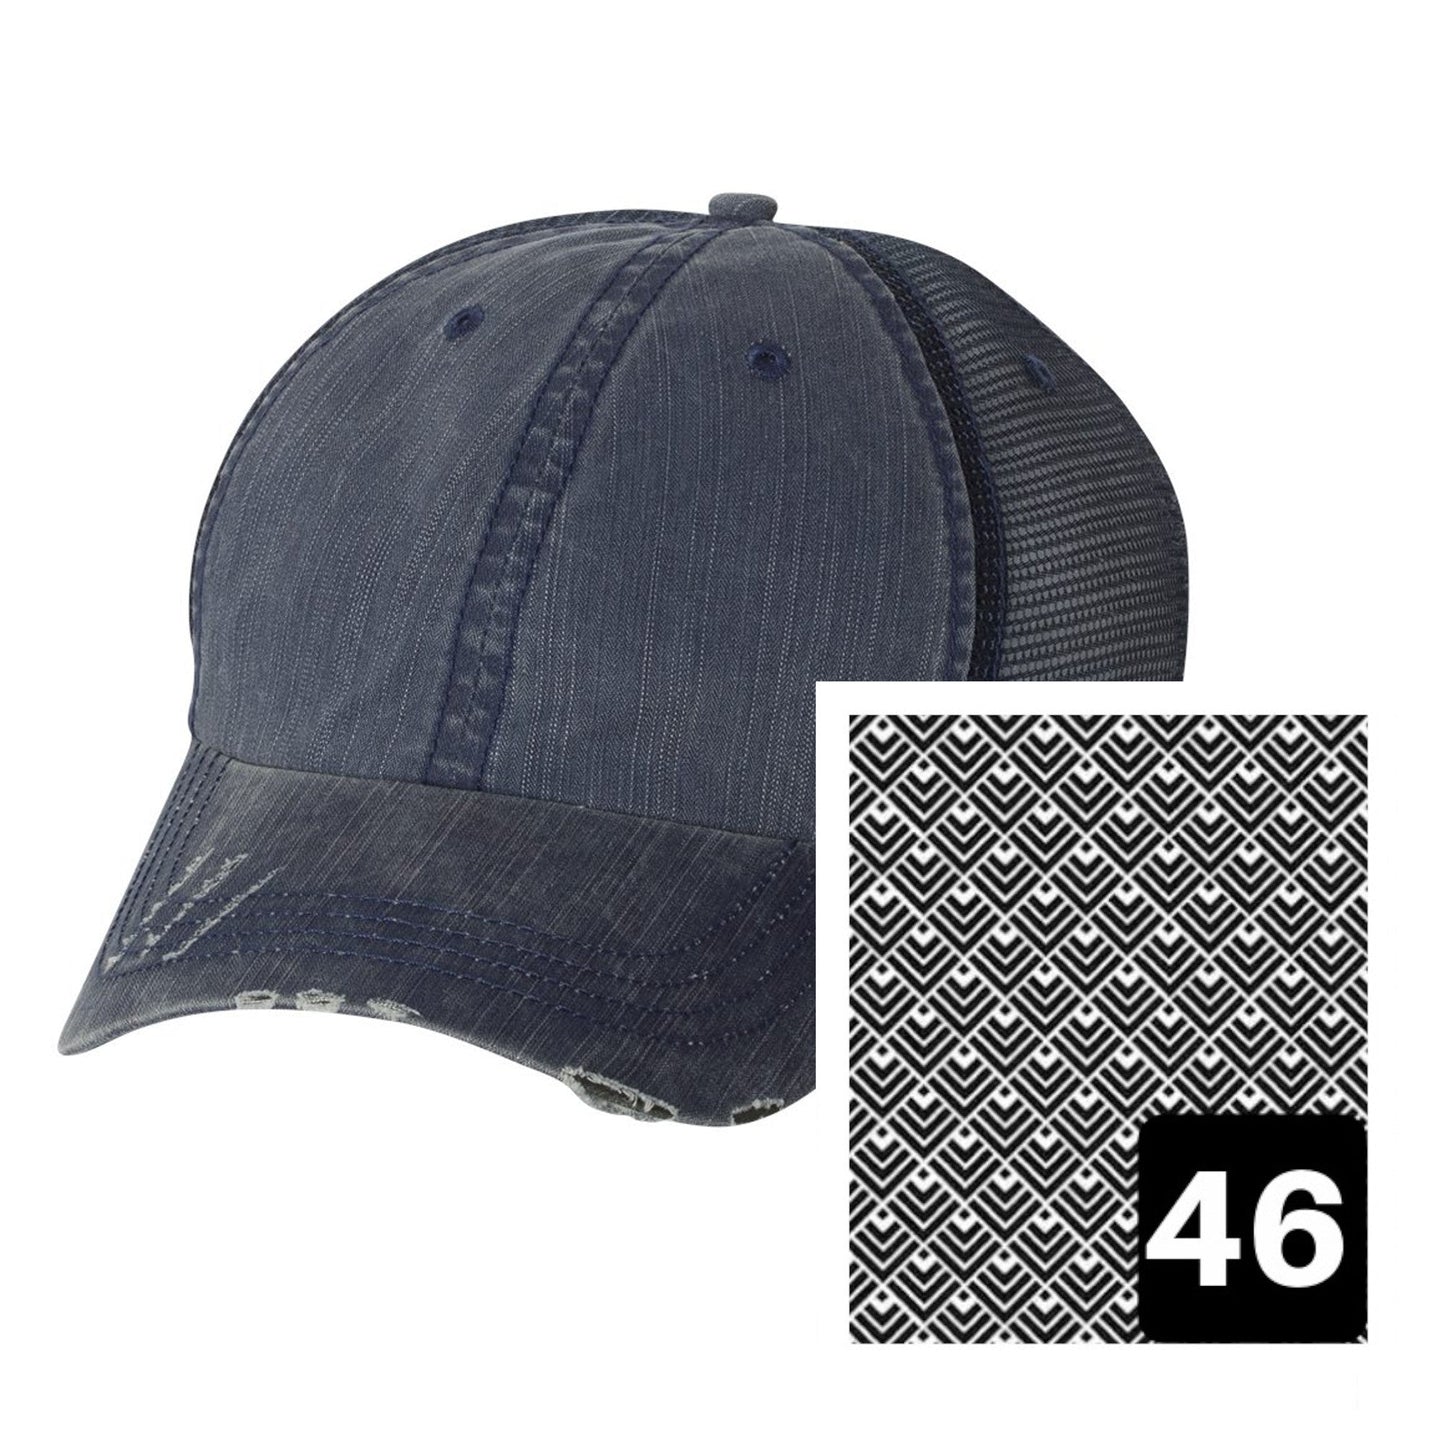 Oregon Hat | Navy Distressed Trucker Cap | Many Fabric Choices